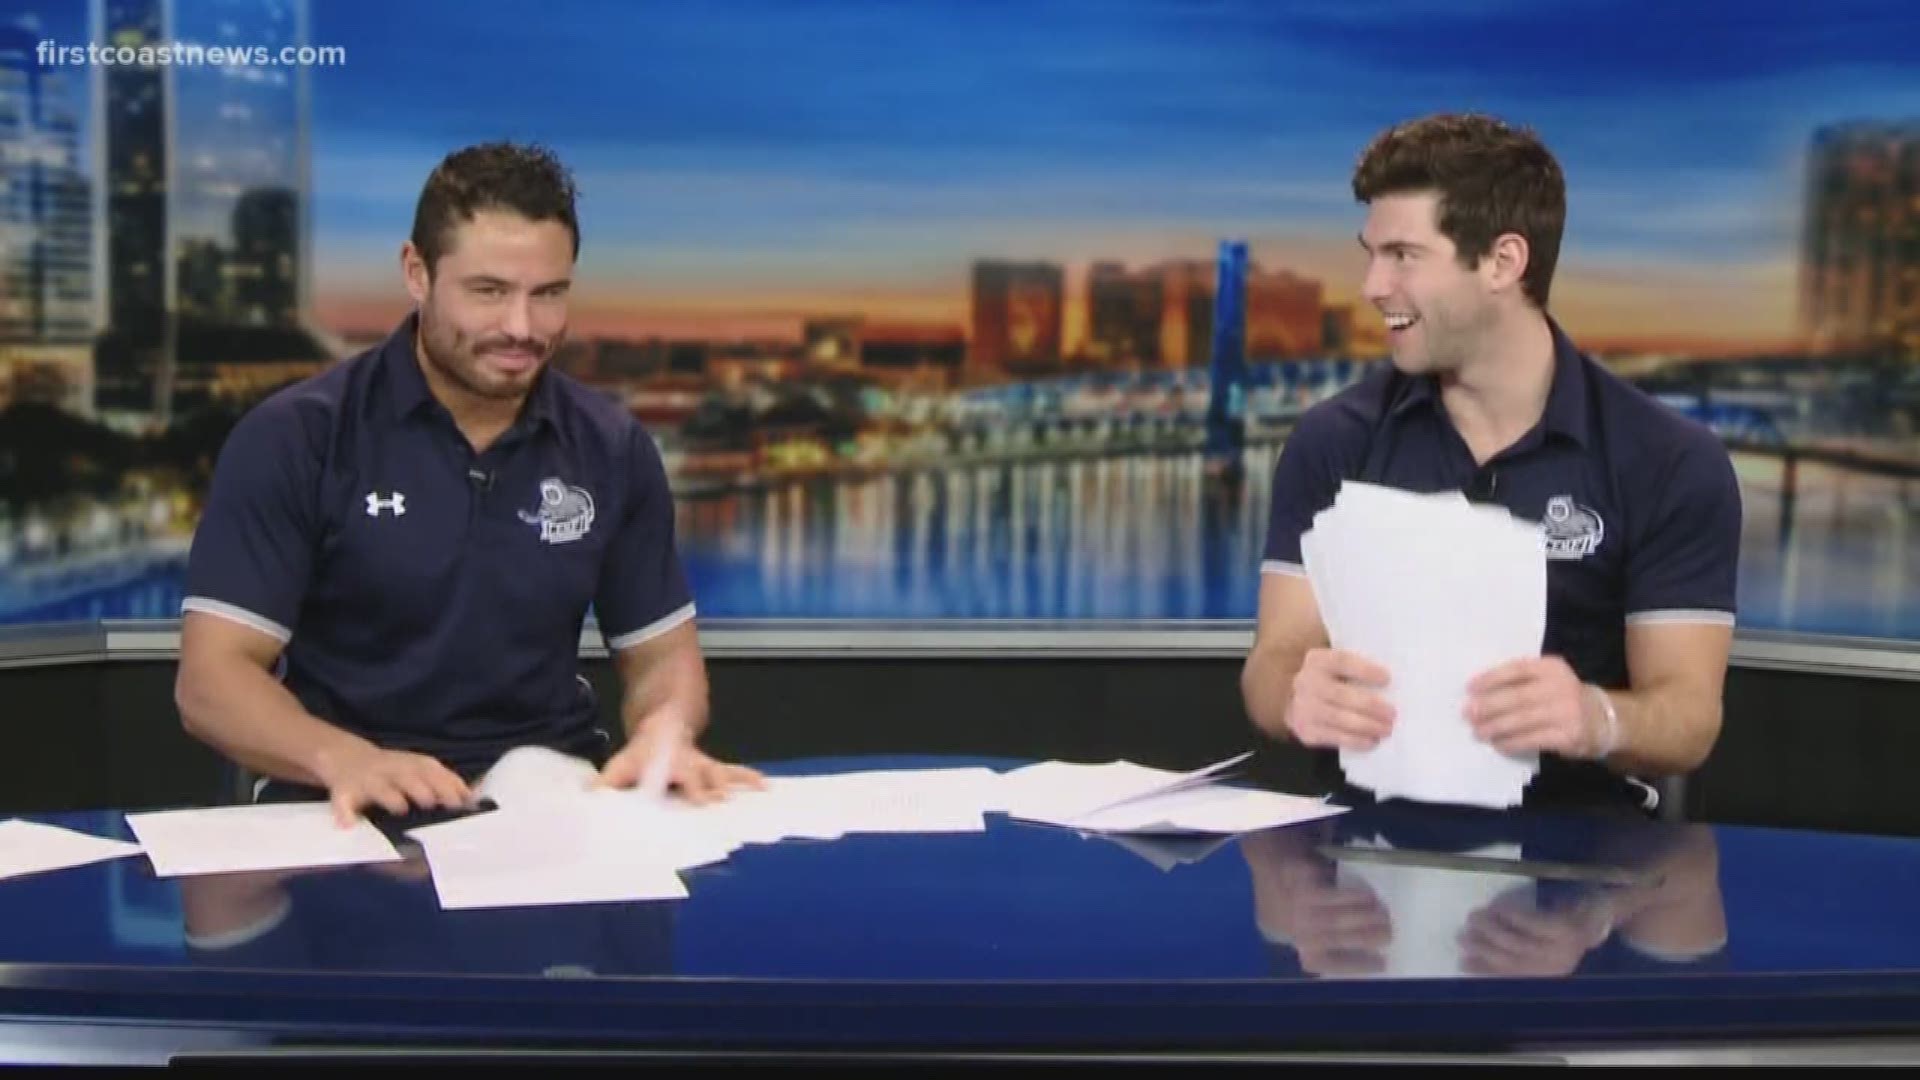 The Jacksonville Icemen hosted some First Coast News on-air personalities at practice, then the boys on blades traded in their skates to try anchoring a newscast.